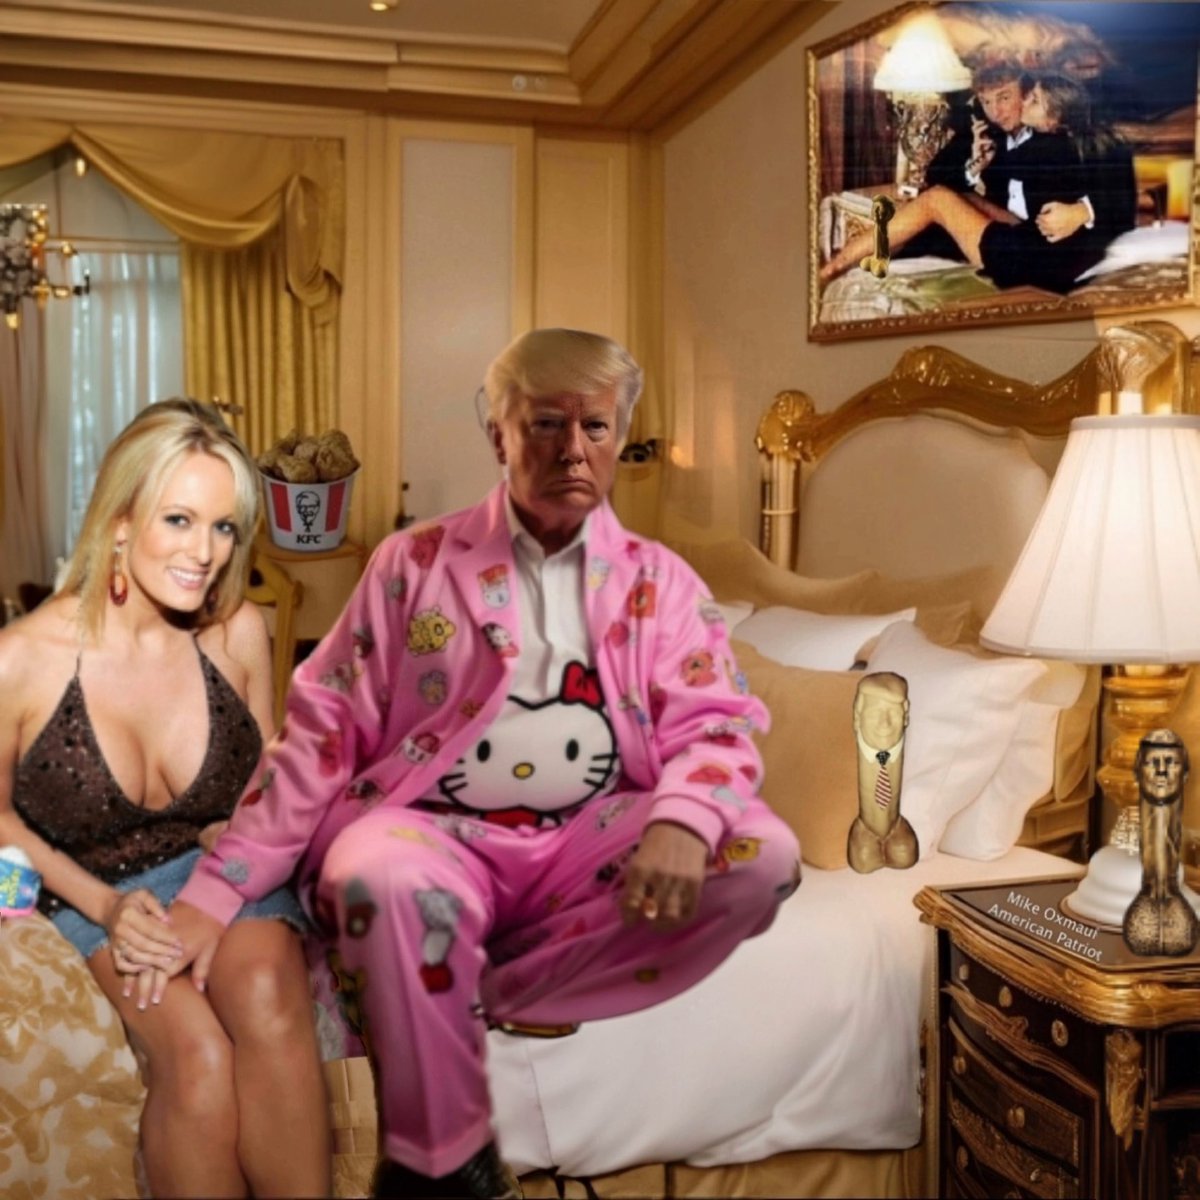 Unfortunately for Trump, this photo just leaked online of @StormyDaniels meeting @realDonaldTrump in a hotel room, this collaborates with #Stormy_Daniels testimony that #Trump wore Hello Kitty pajamas when meeting her. #StormyDaniels #TrumpCourt #HushMoneyTrial #Trump2024 #MAGA